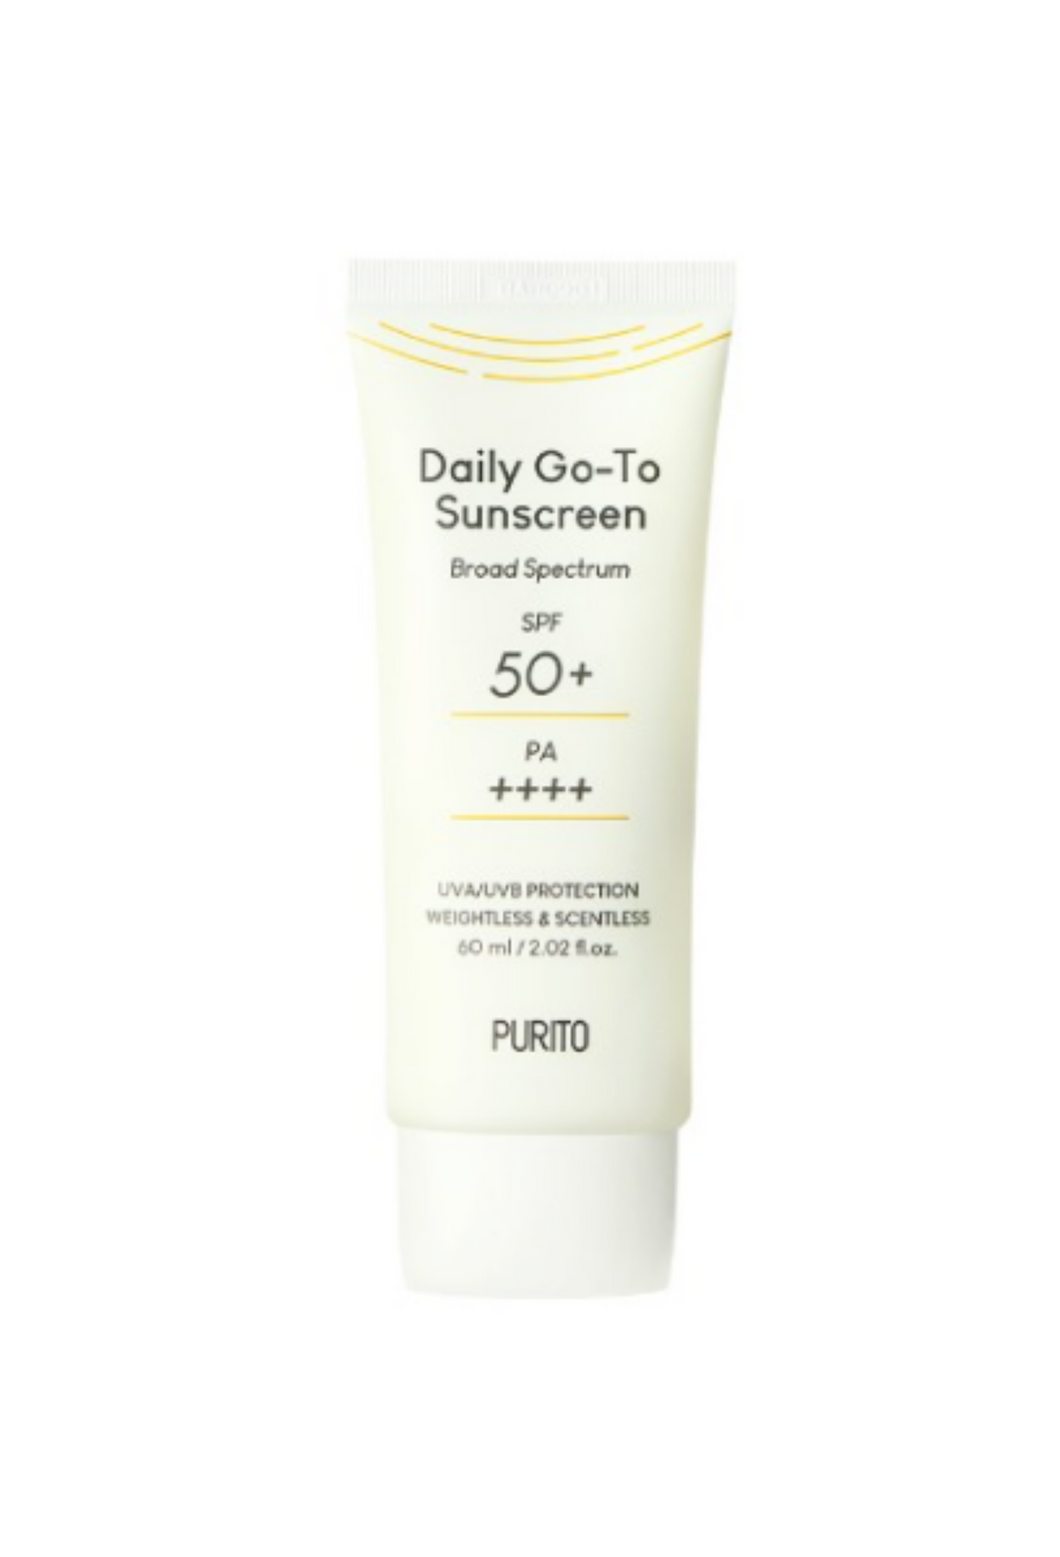 Daily Go-To Sunscreen 50+